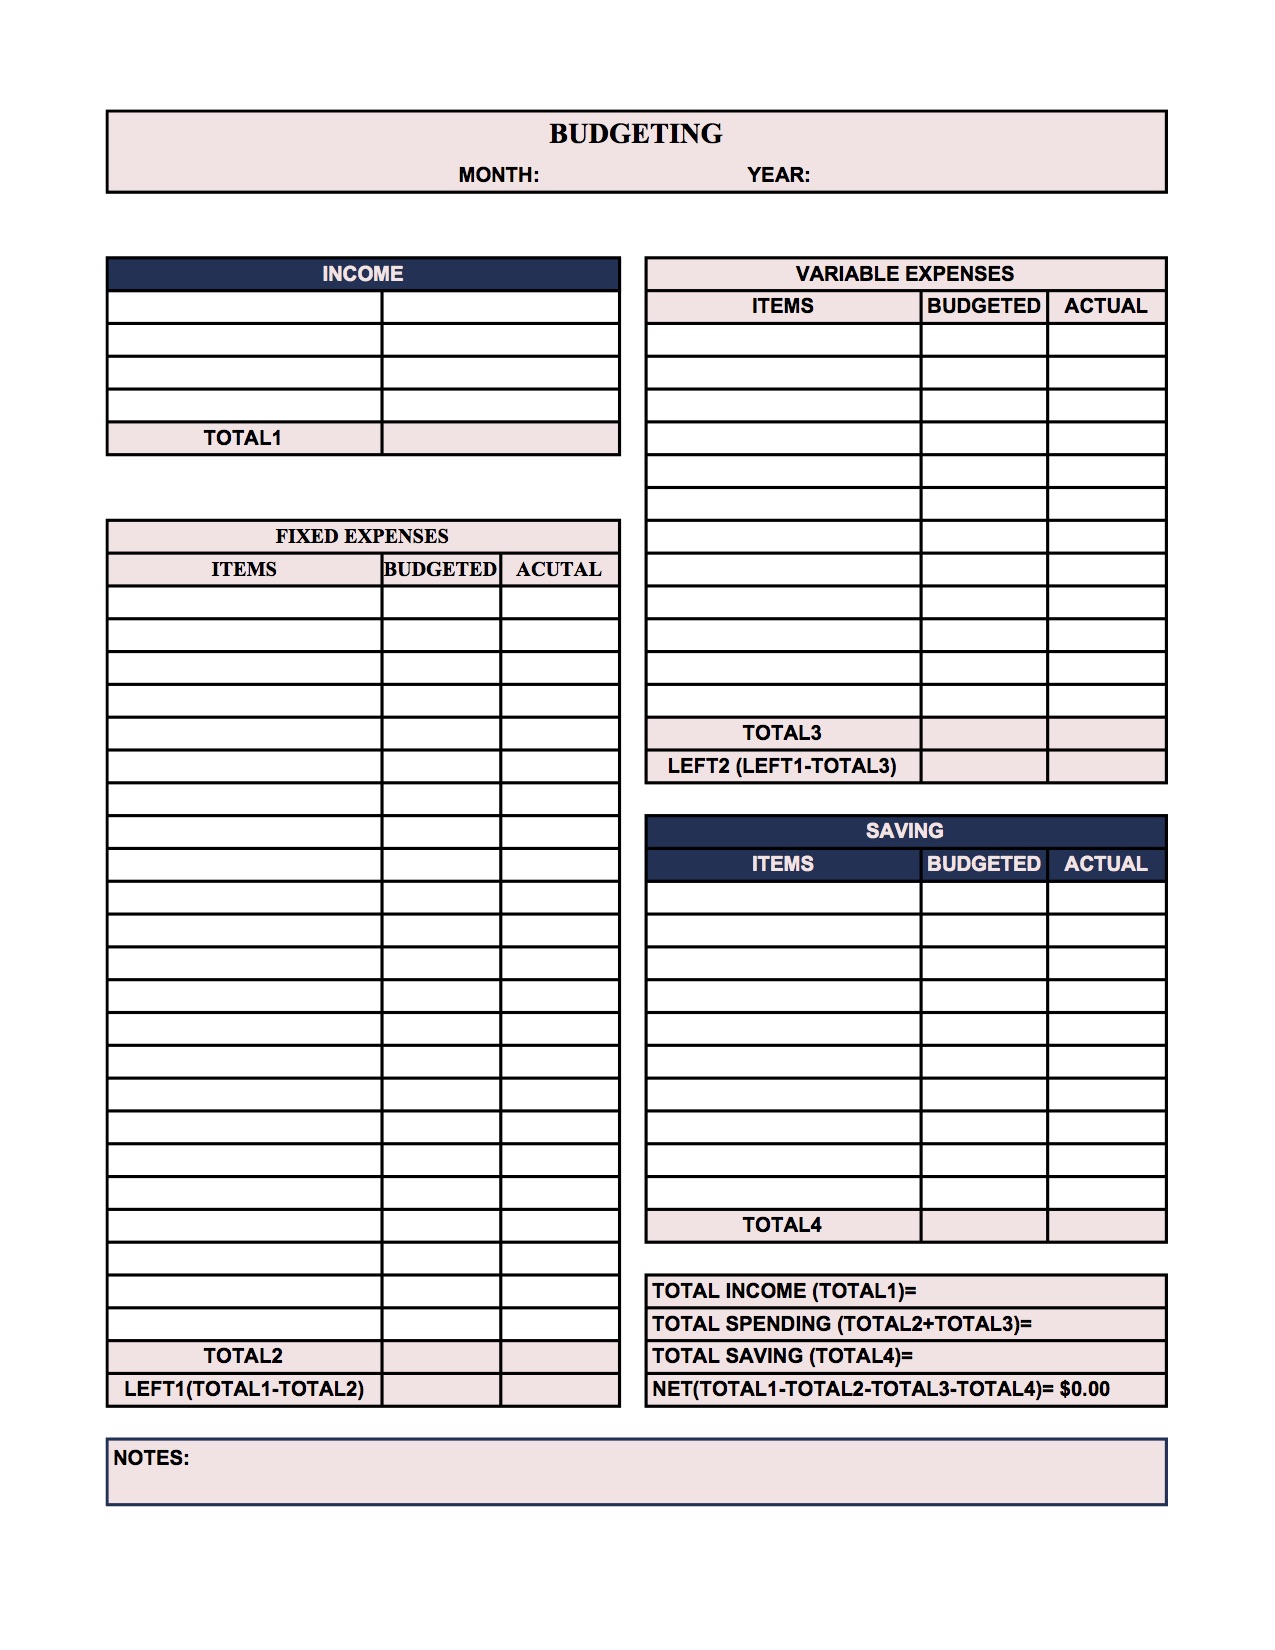 ZeroBased Budget Template Dave Ramsey Inspired Budgeting Method